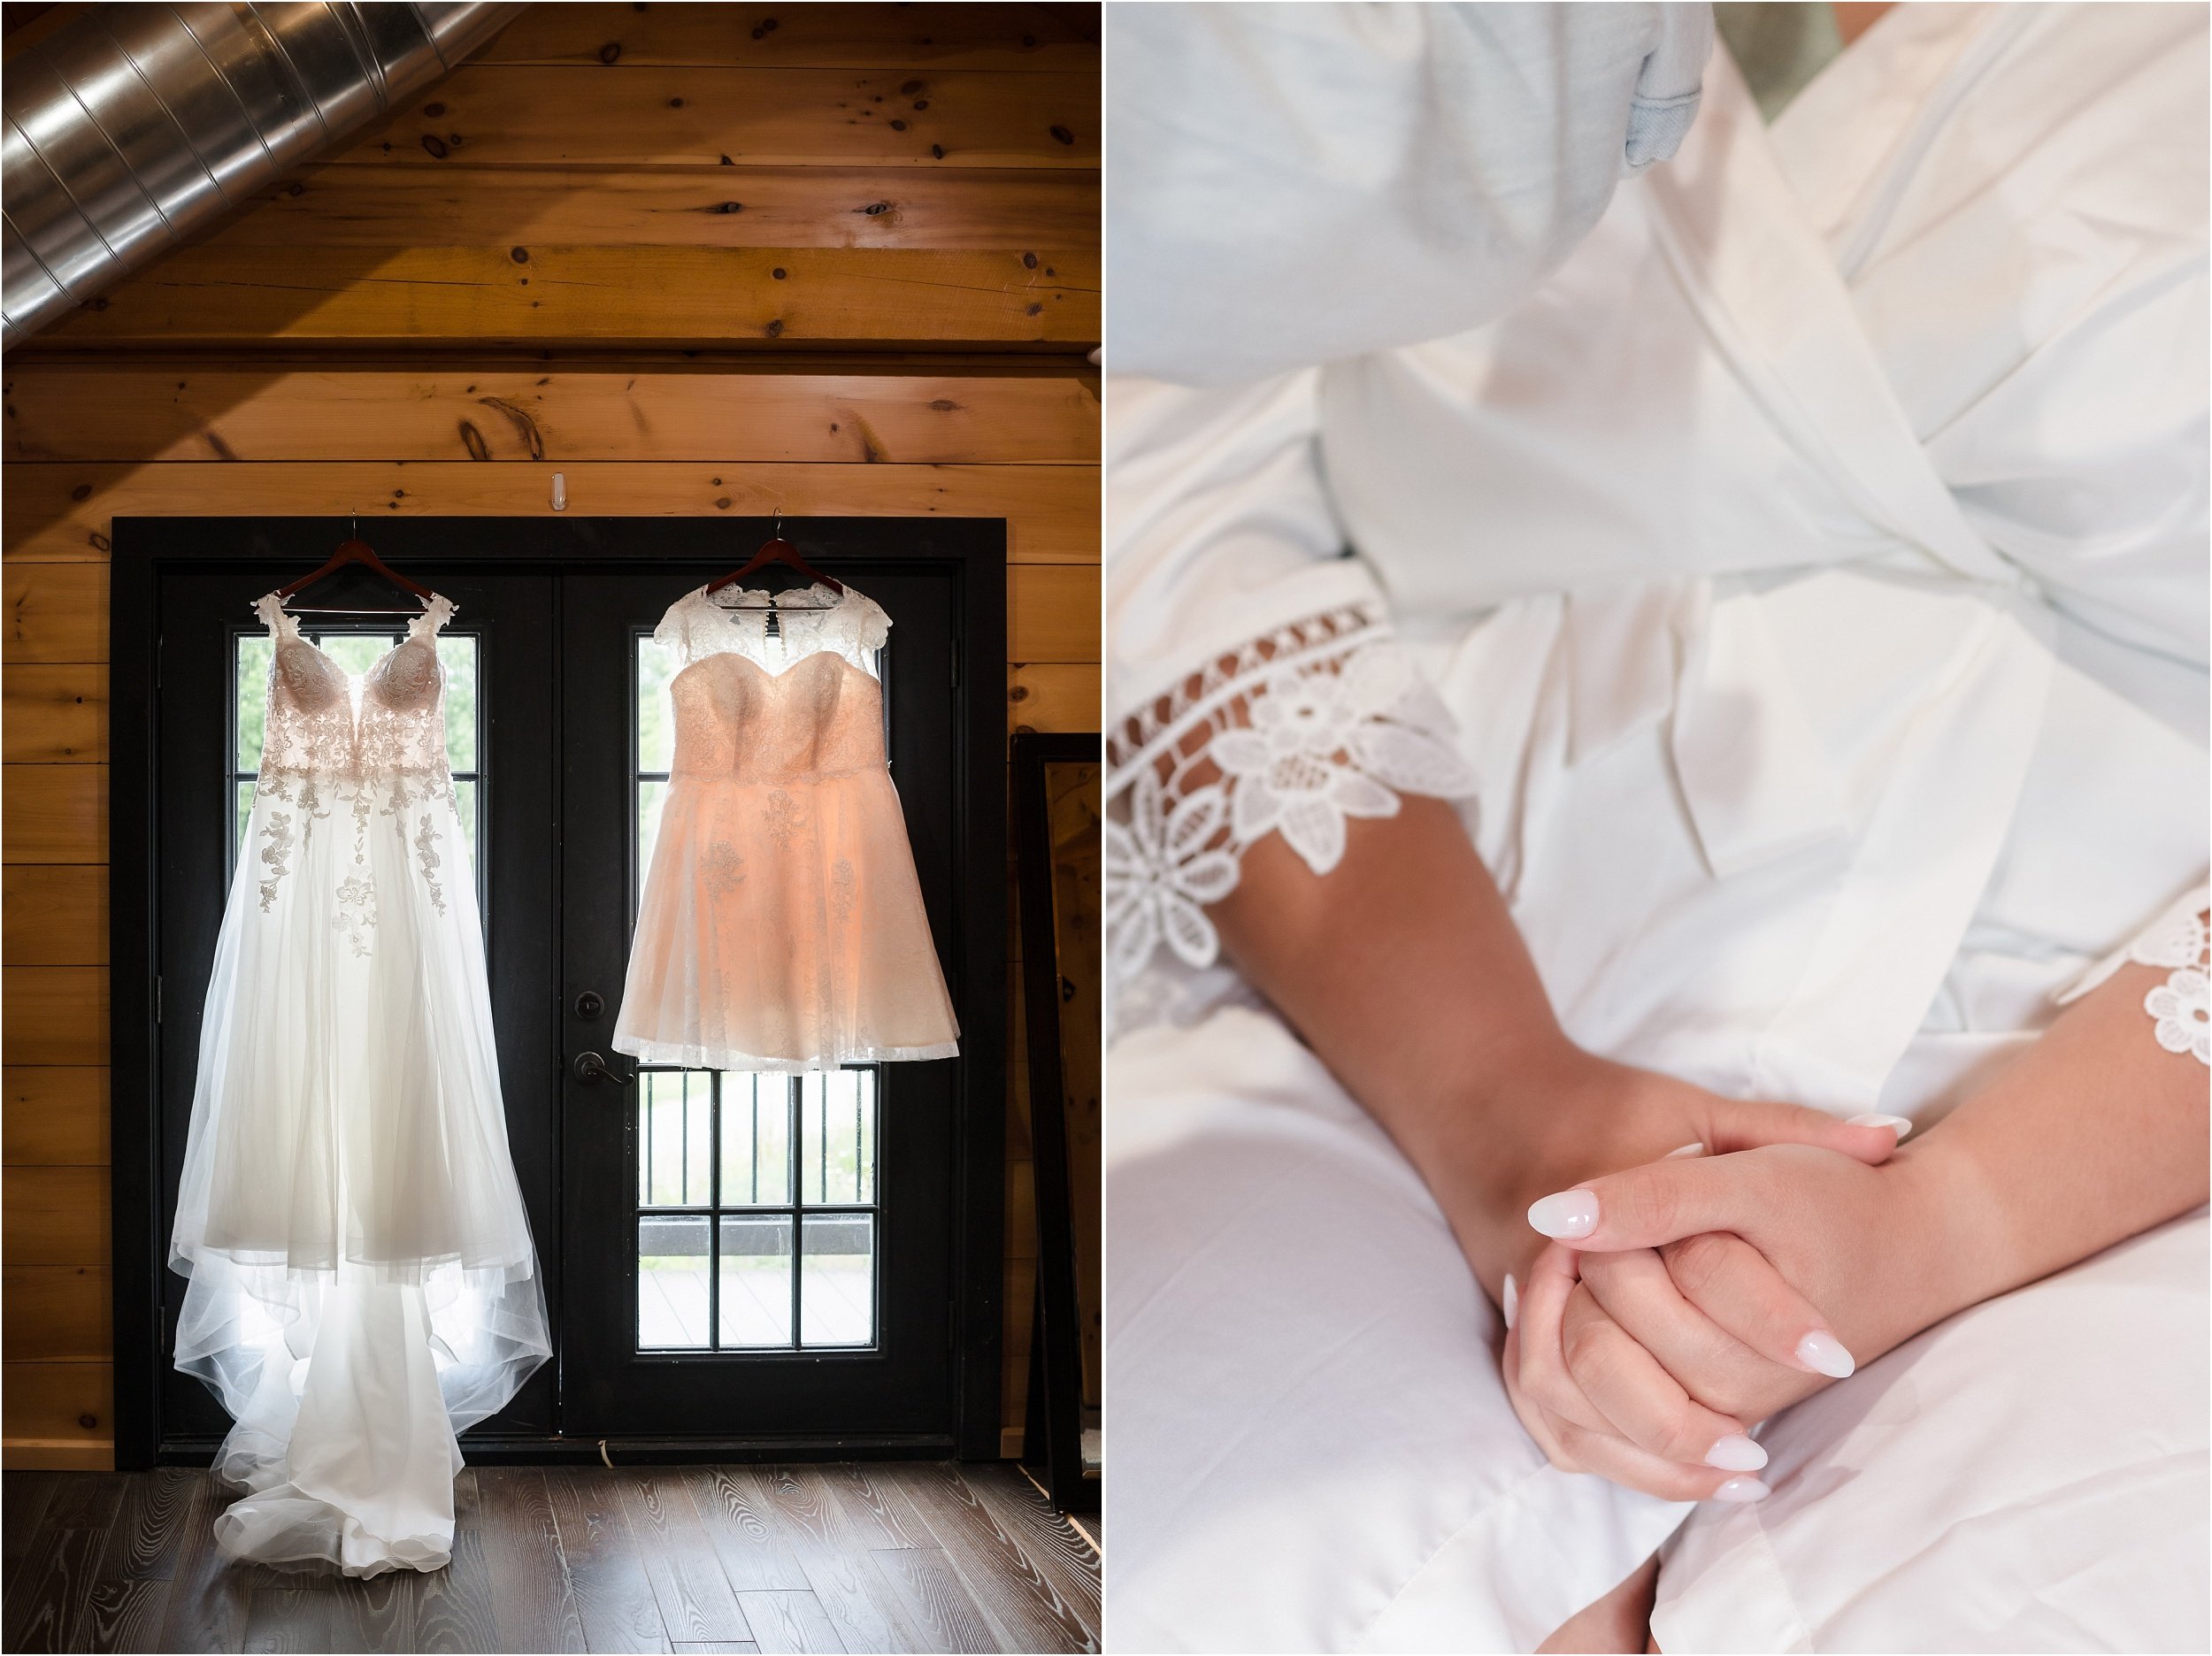  A bride’s two wedding dresses and a close-up of her manicured hands at a farm venue loft.  